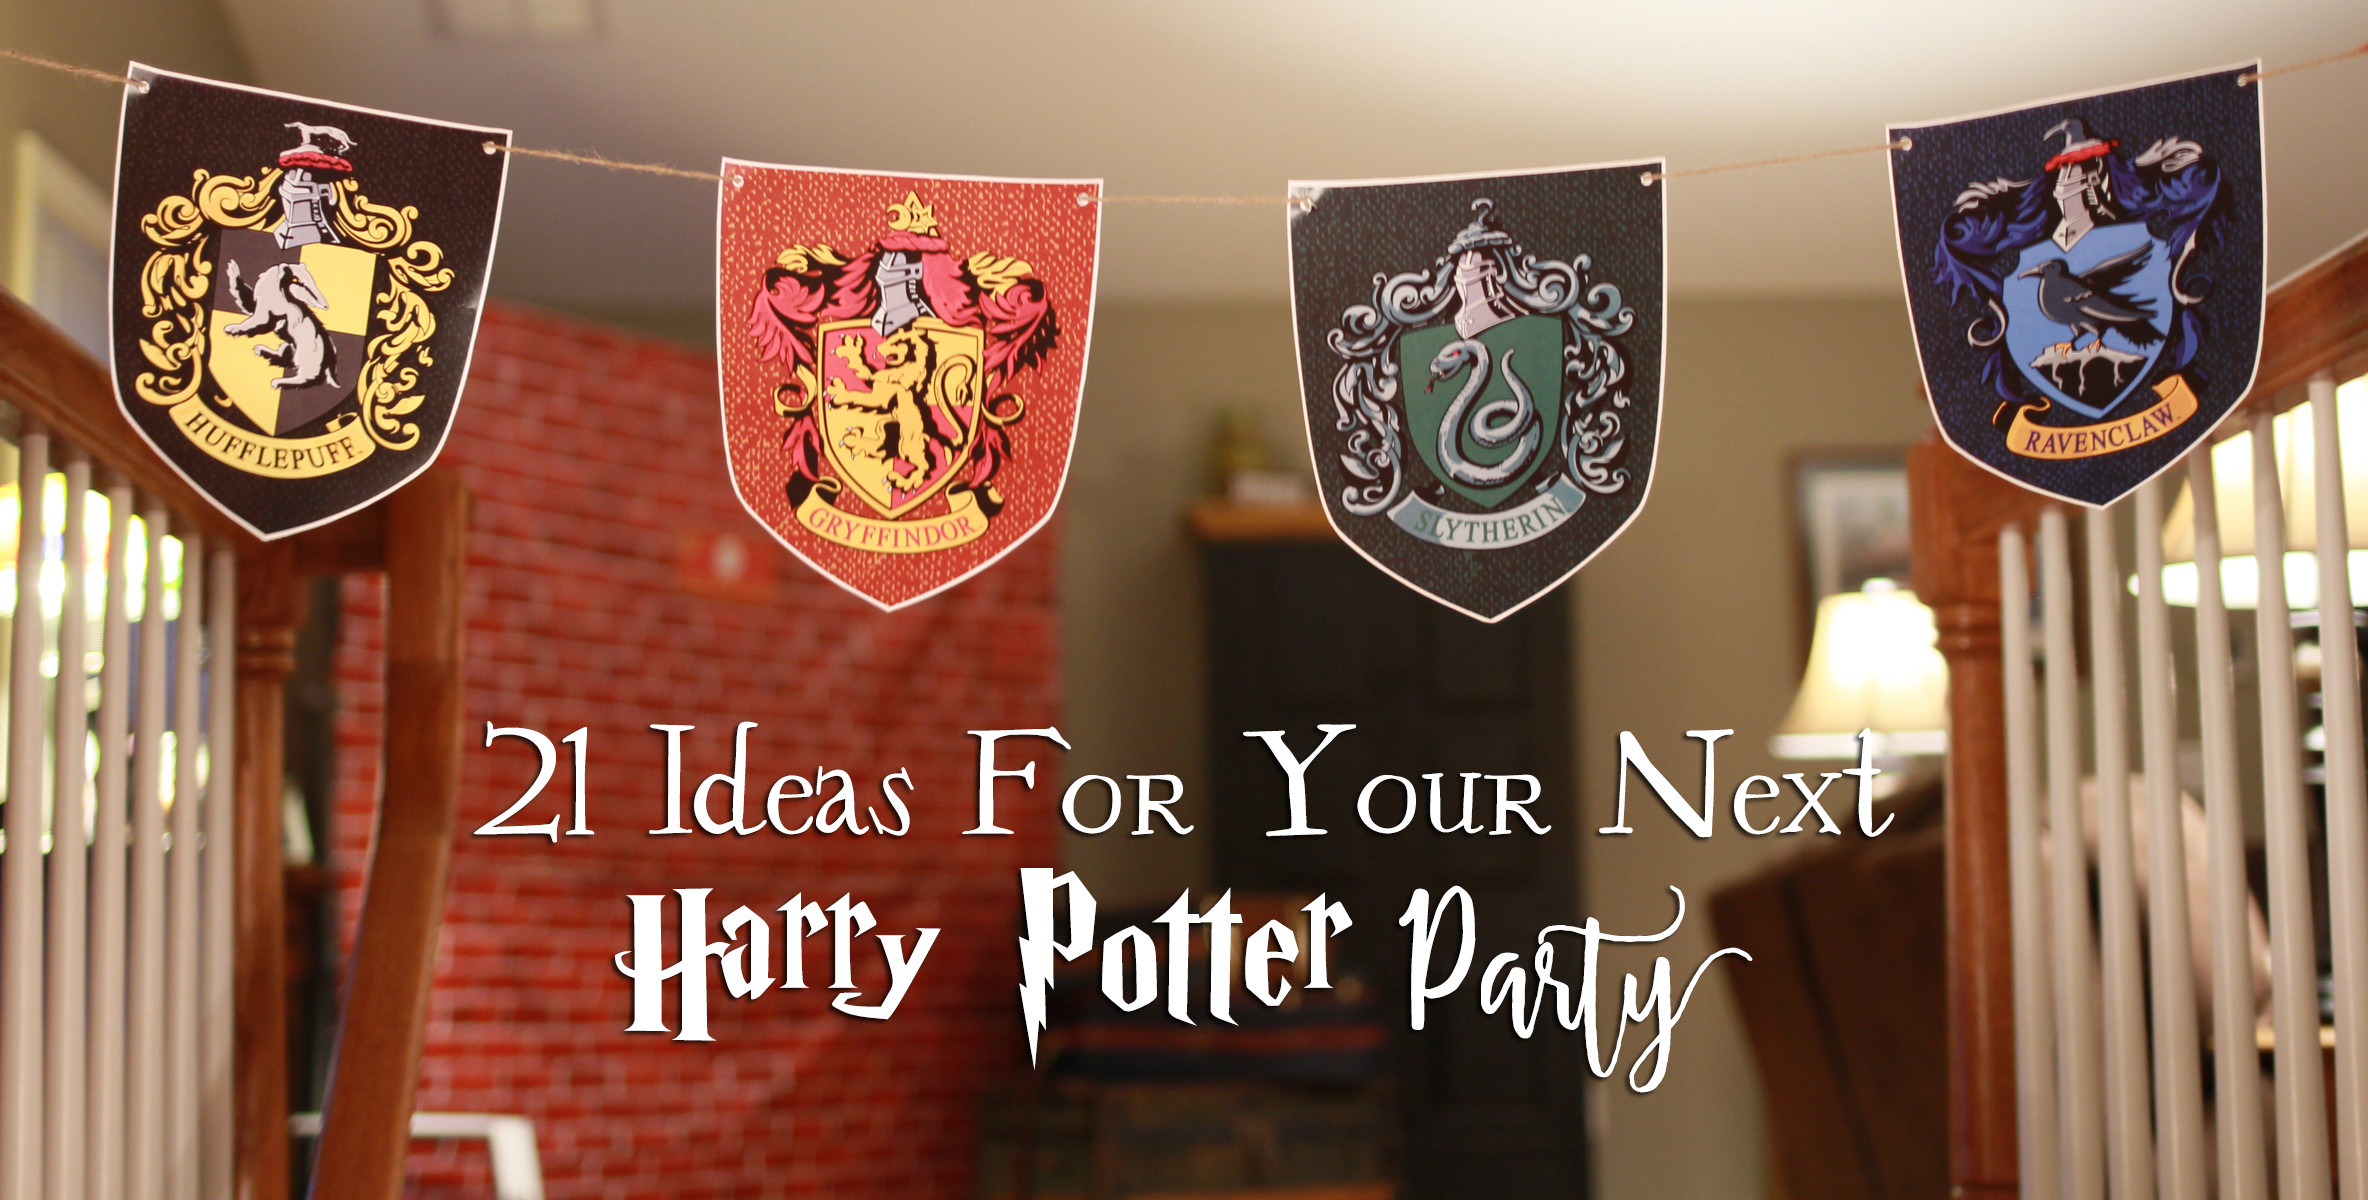 Harry Potter Halloween Party Ideas
 21 DIY Ideas for Your Next Harry Potter Party Another